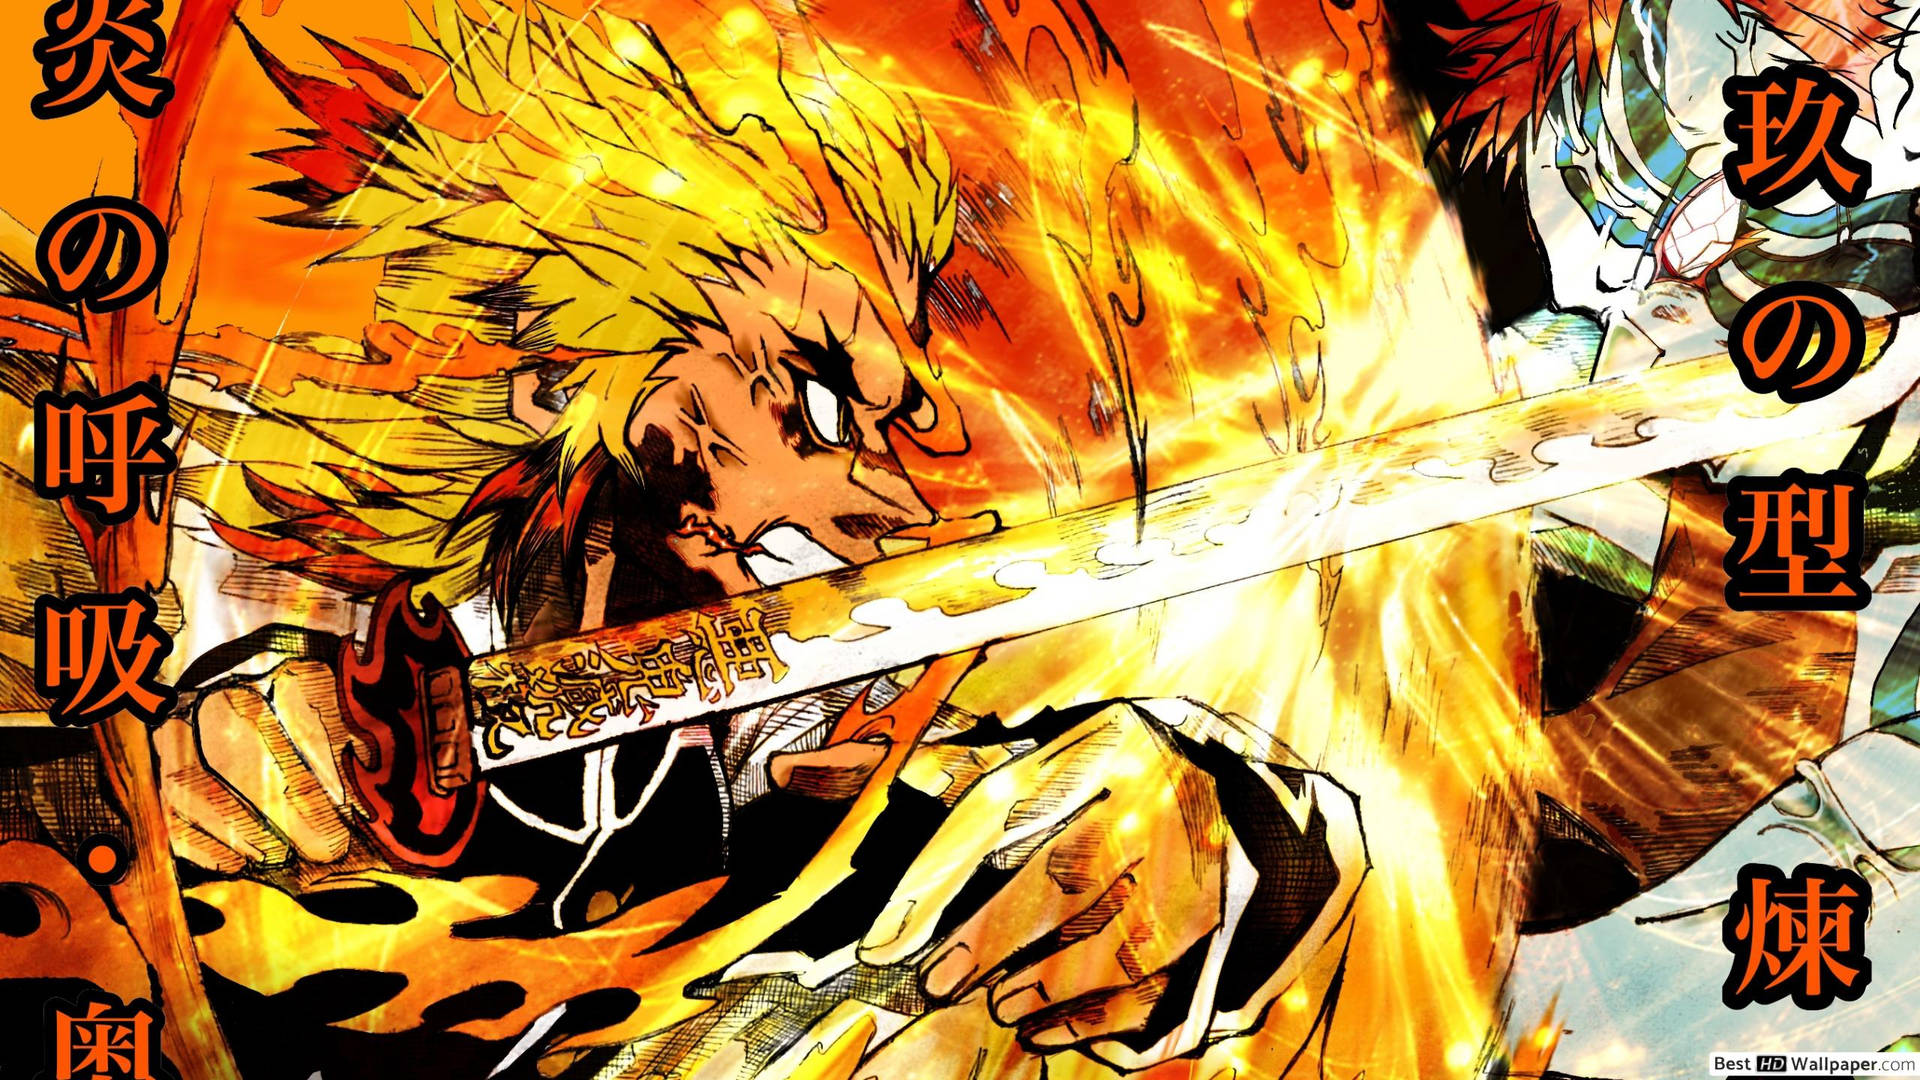 Experience the power of Rengoku's Flame Breath, 9th Form Wallpaper